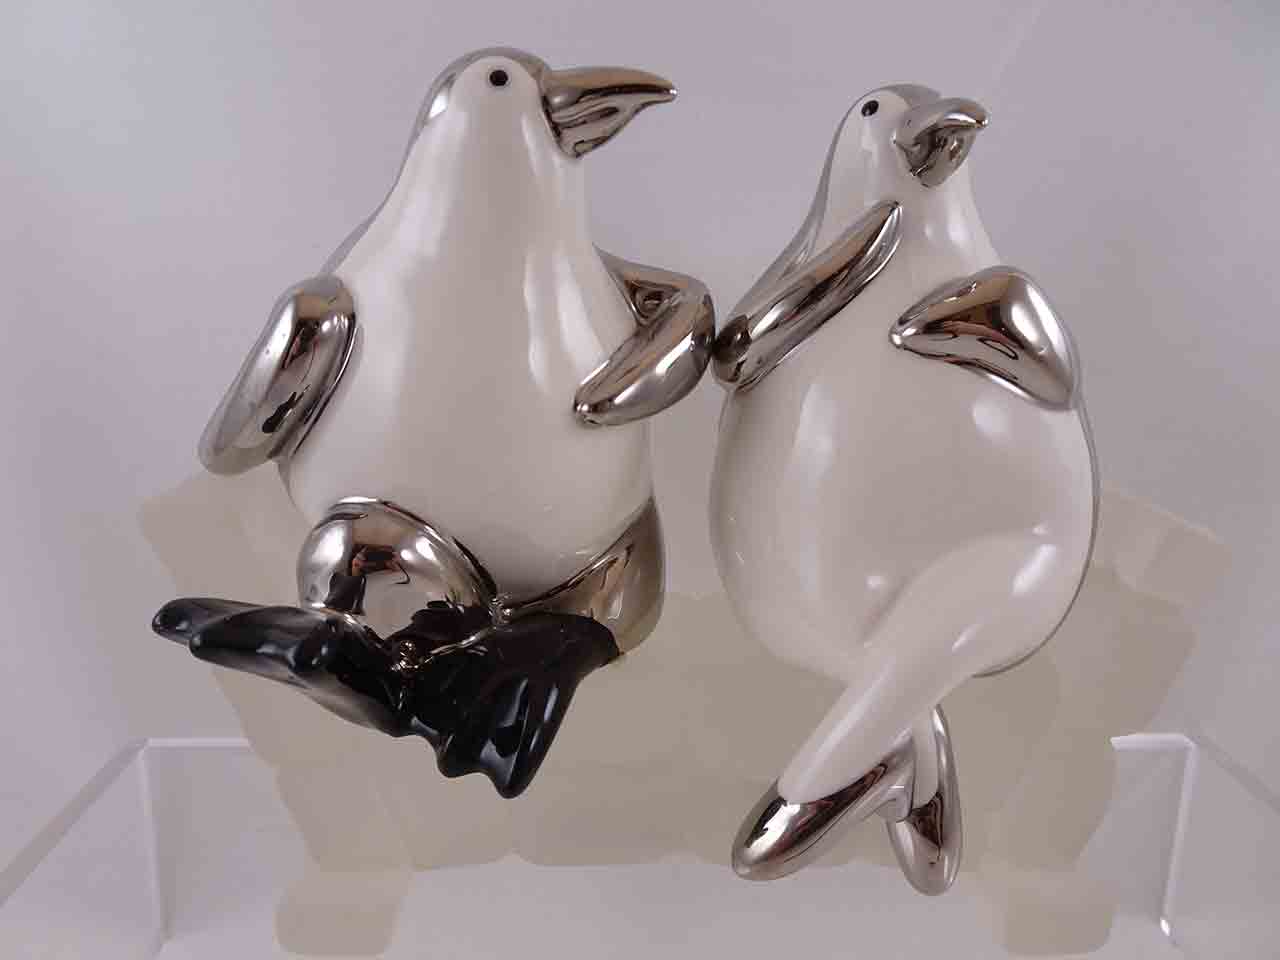 Department 56 penguins sitting on an ice bench salt and pepper shakers